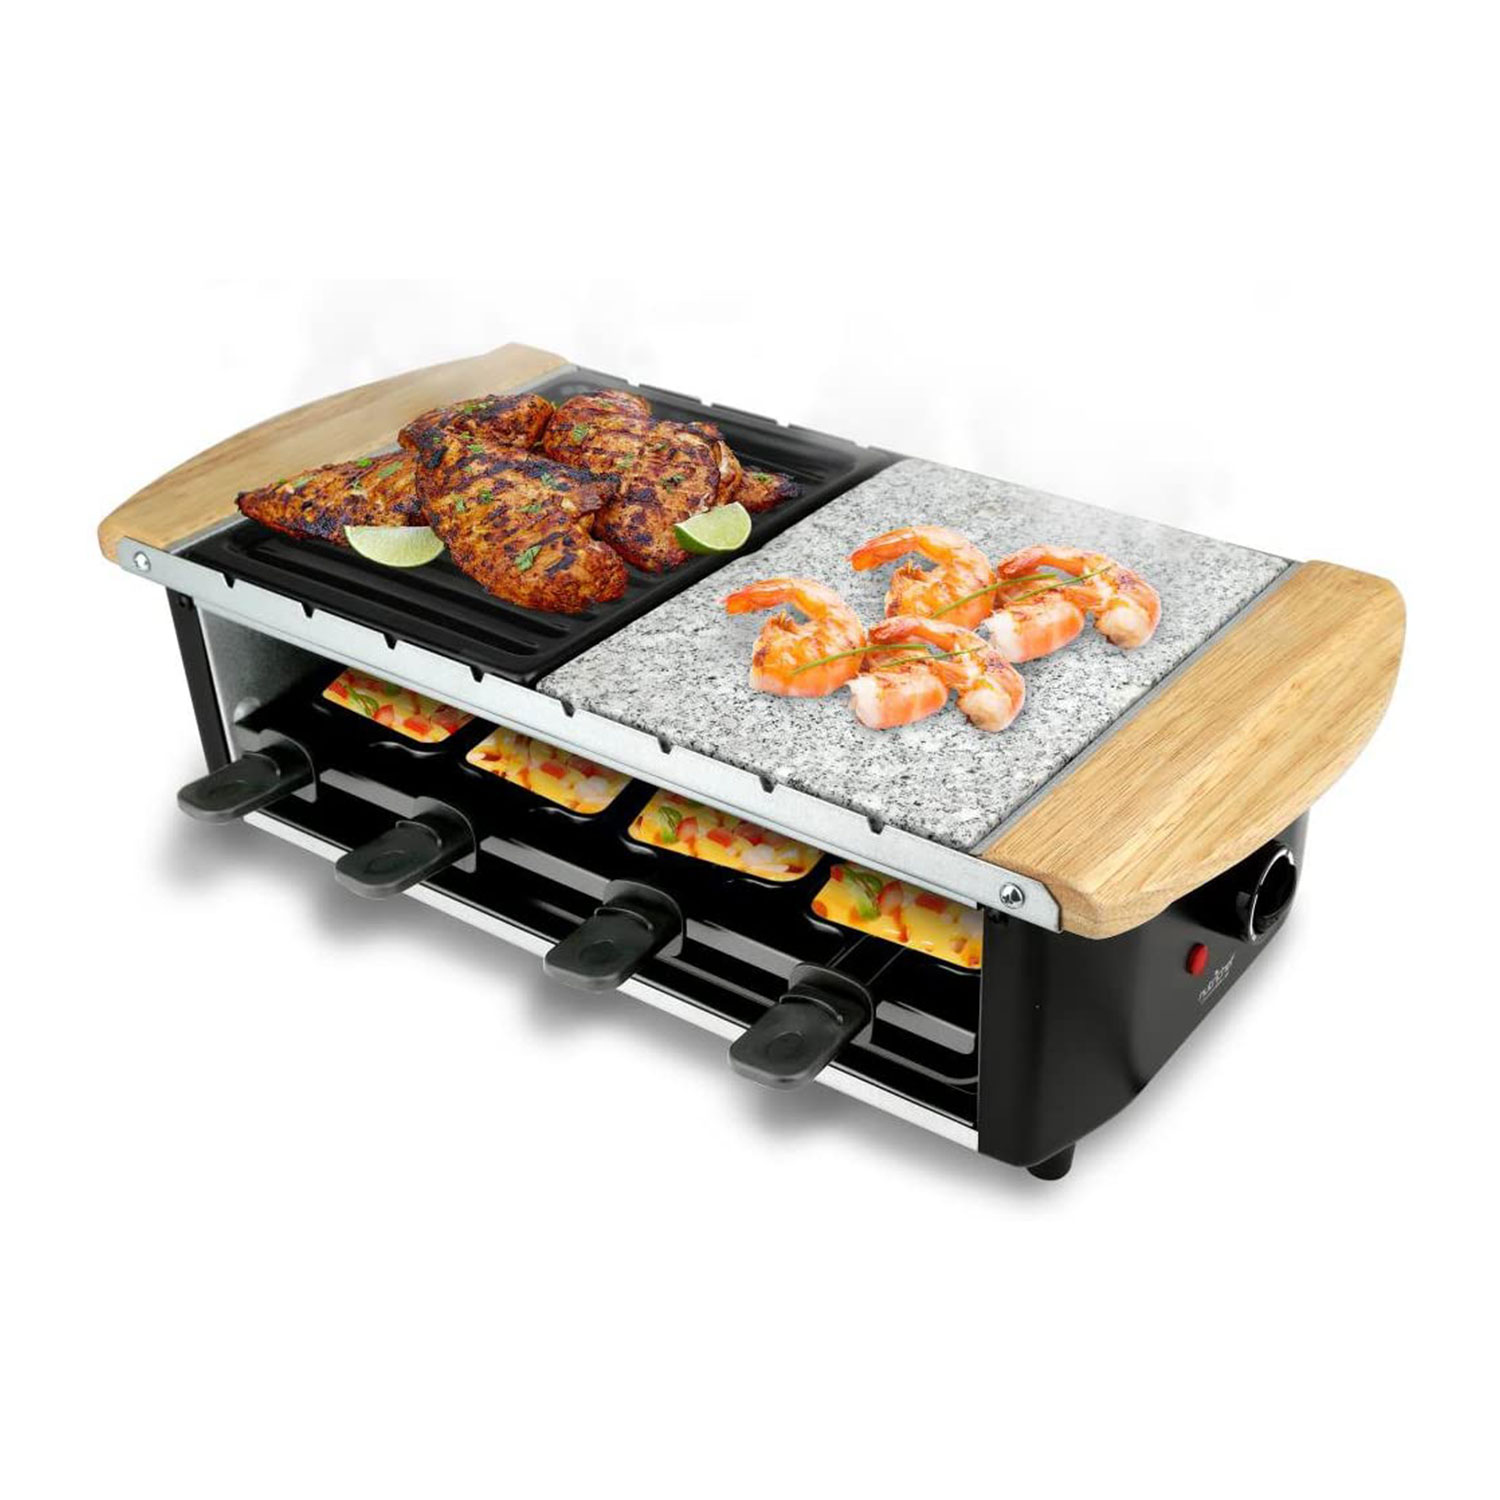 NutriChef Raclette 1200W 2 Tier Stone Plate and Metal Grill Countertop - image 4 of 5